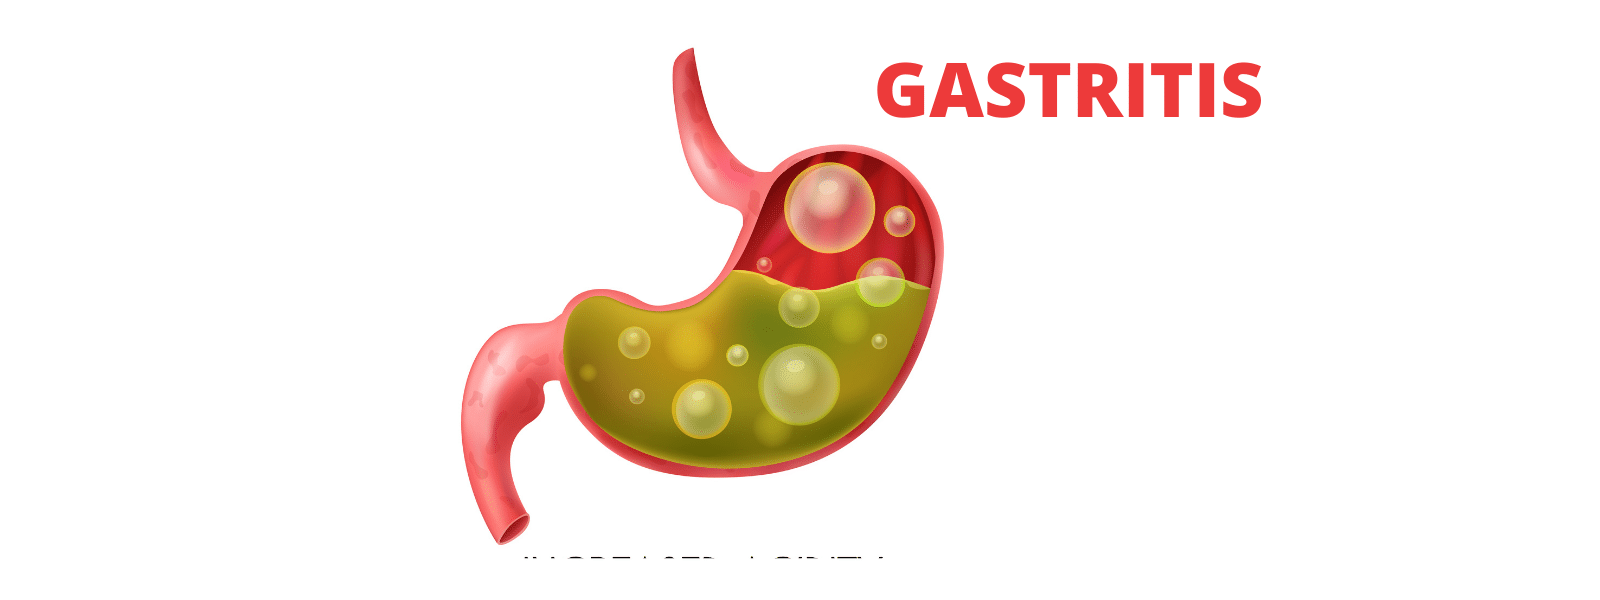 Gastritis: All you need to know